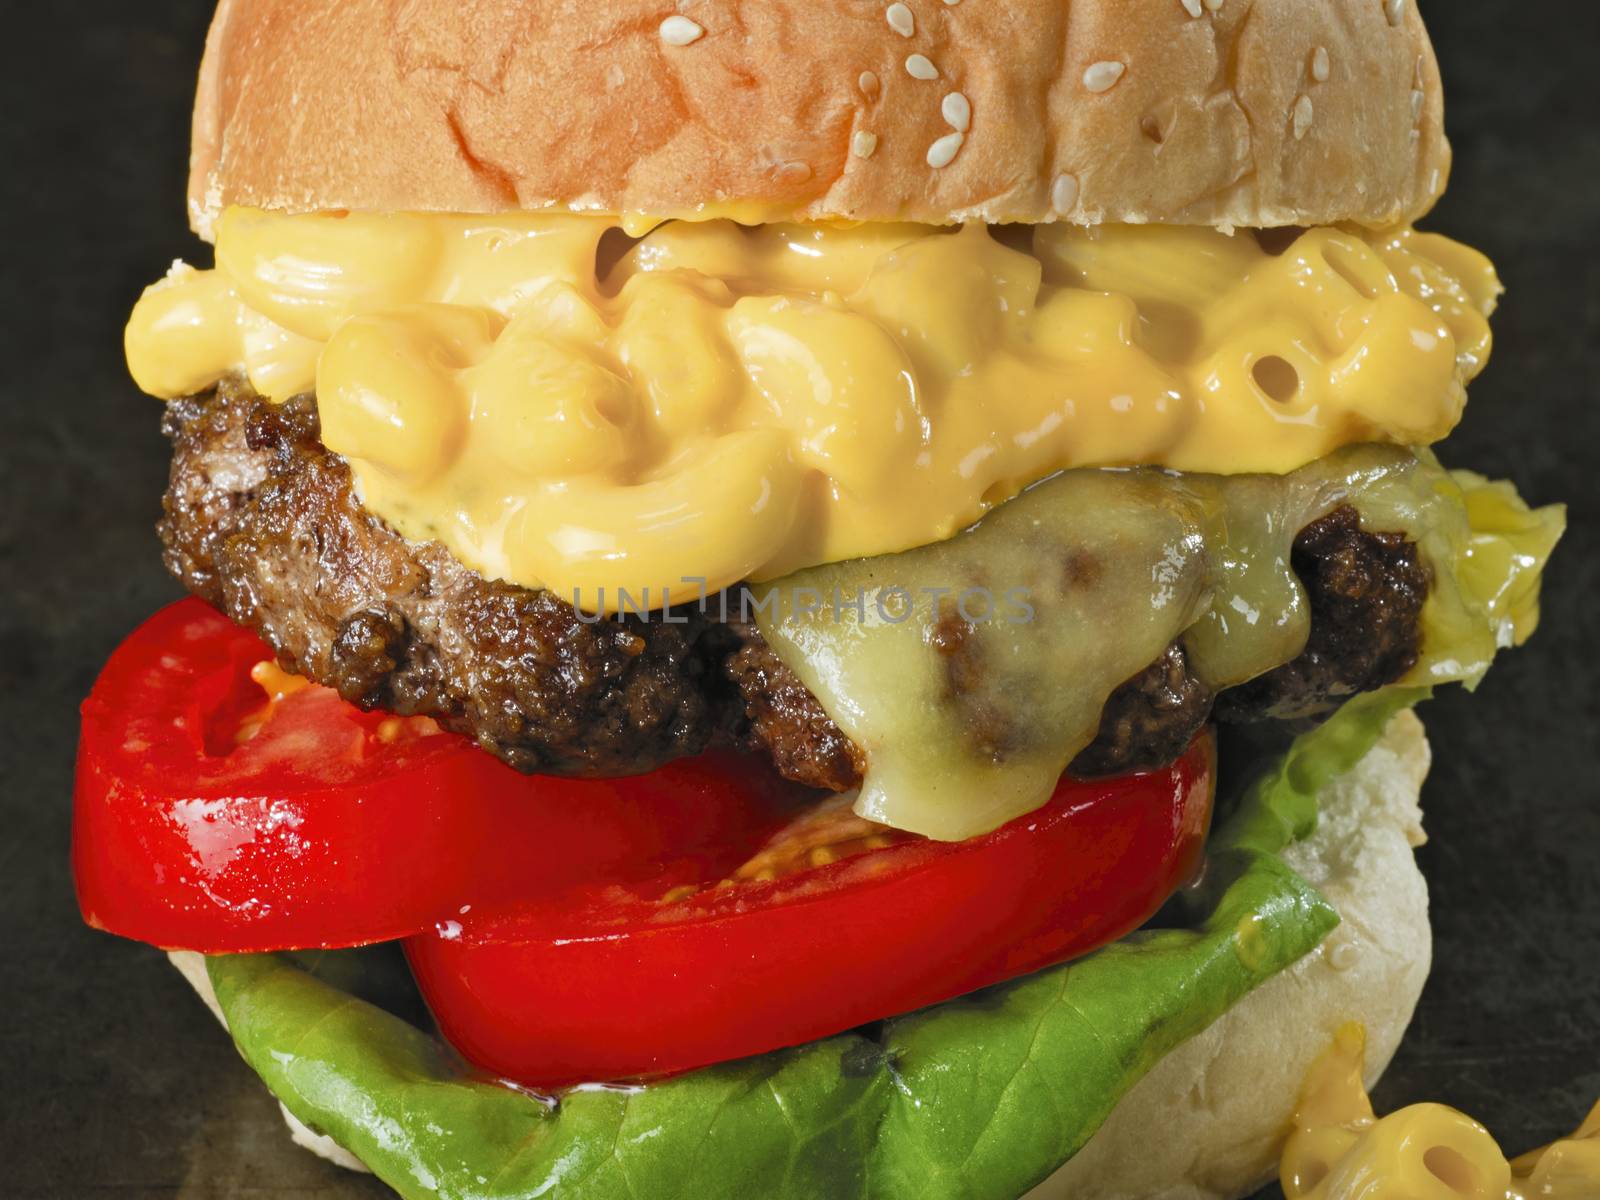 rustic american mac and cheese hamburger by zkruger